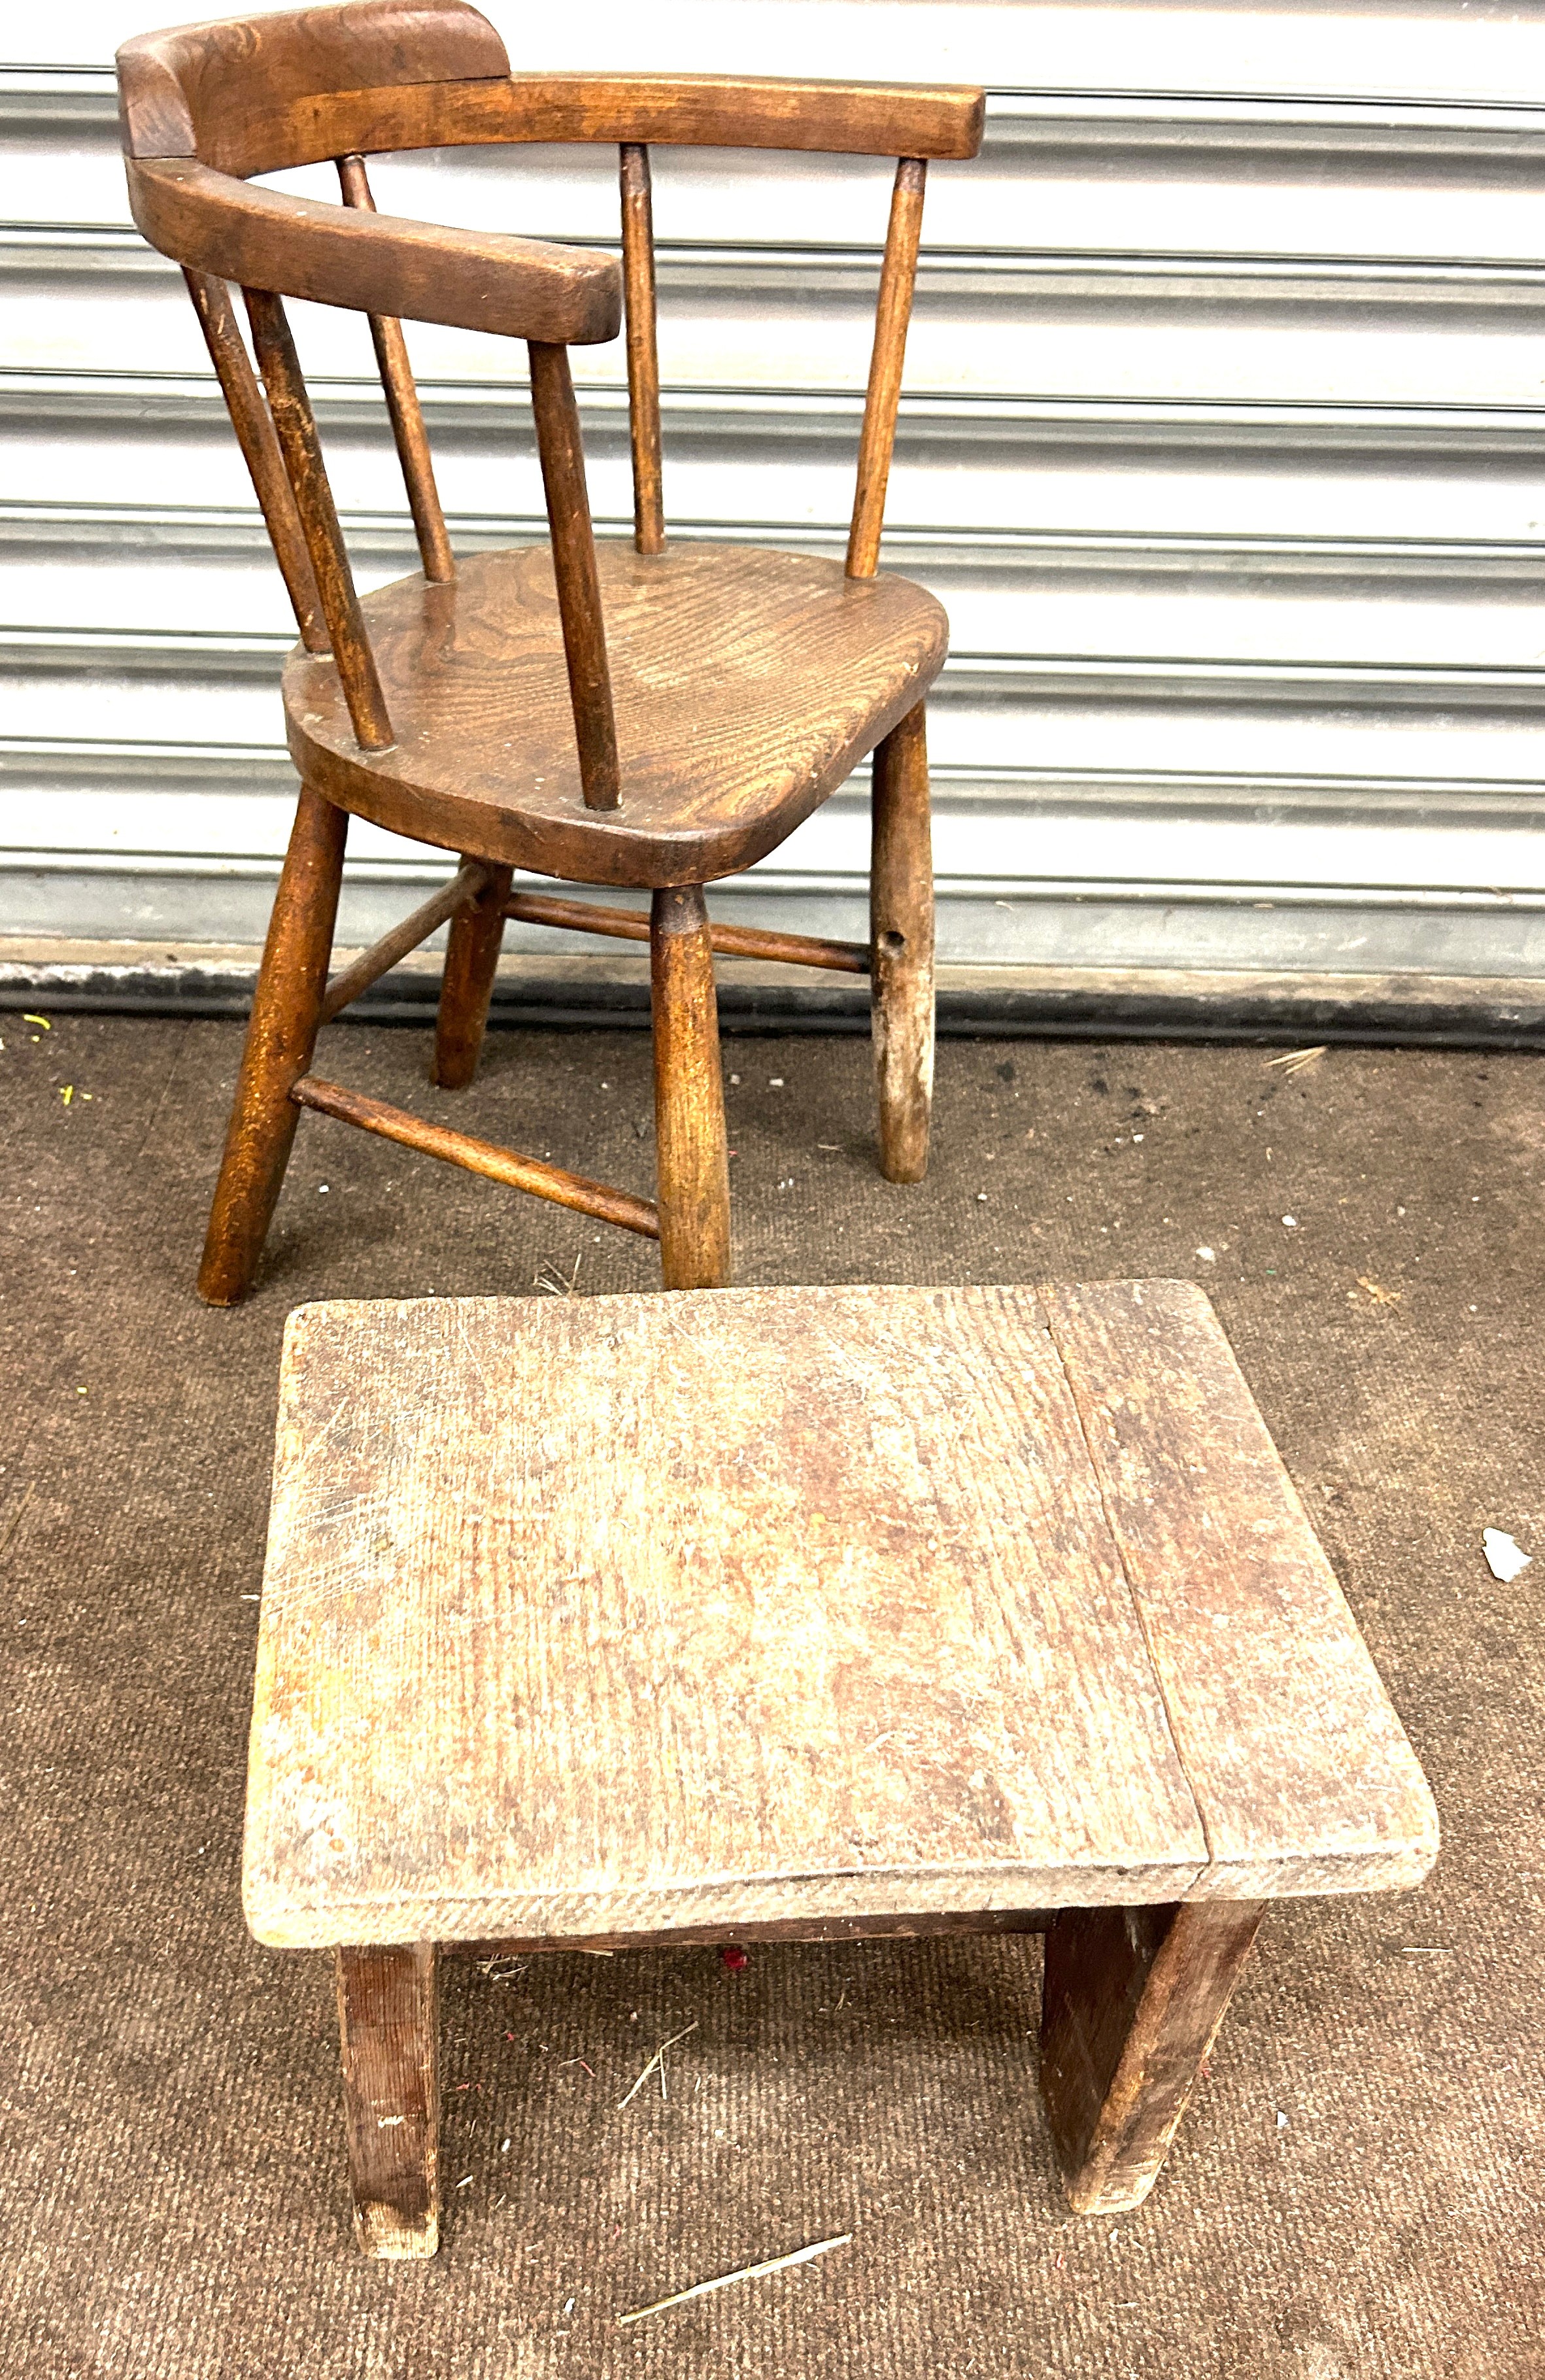 Childs chair and foot stool - Image 2 of 3